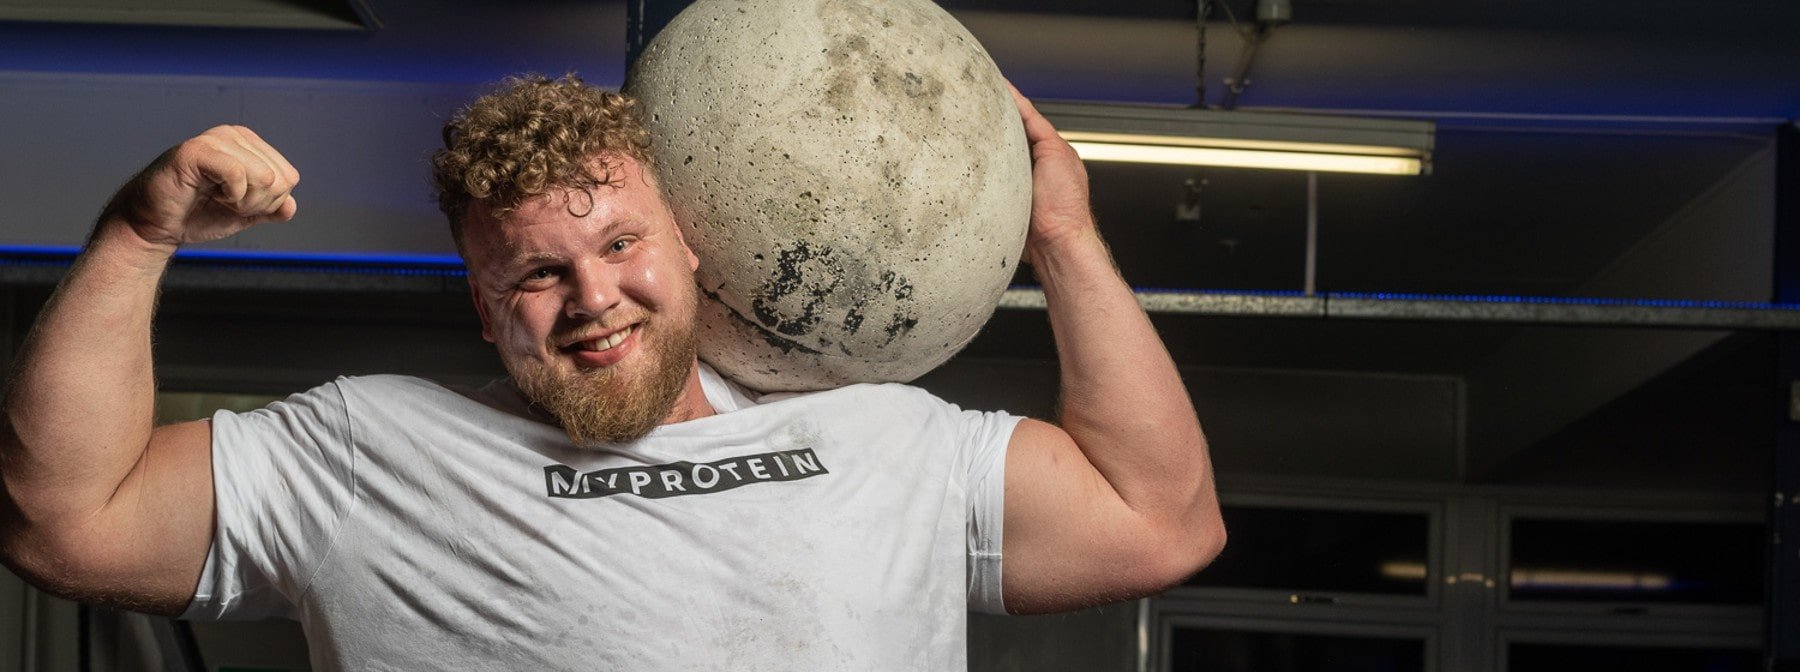 210kg Atlas Stone Moved Like A Pebble By World’s Strongest Man